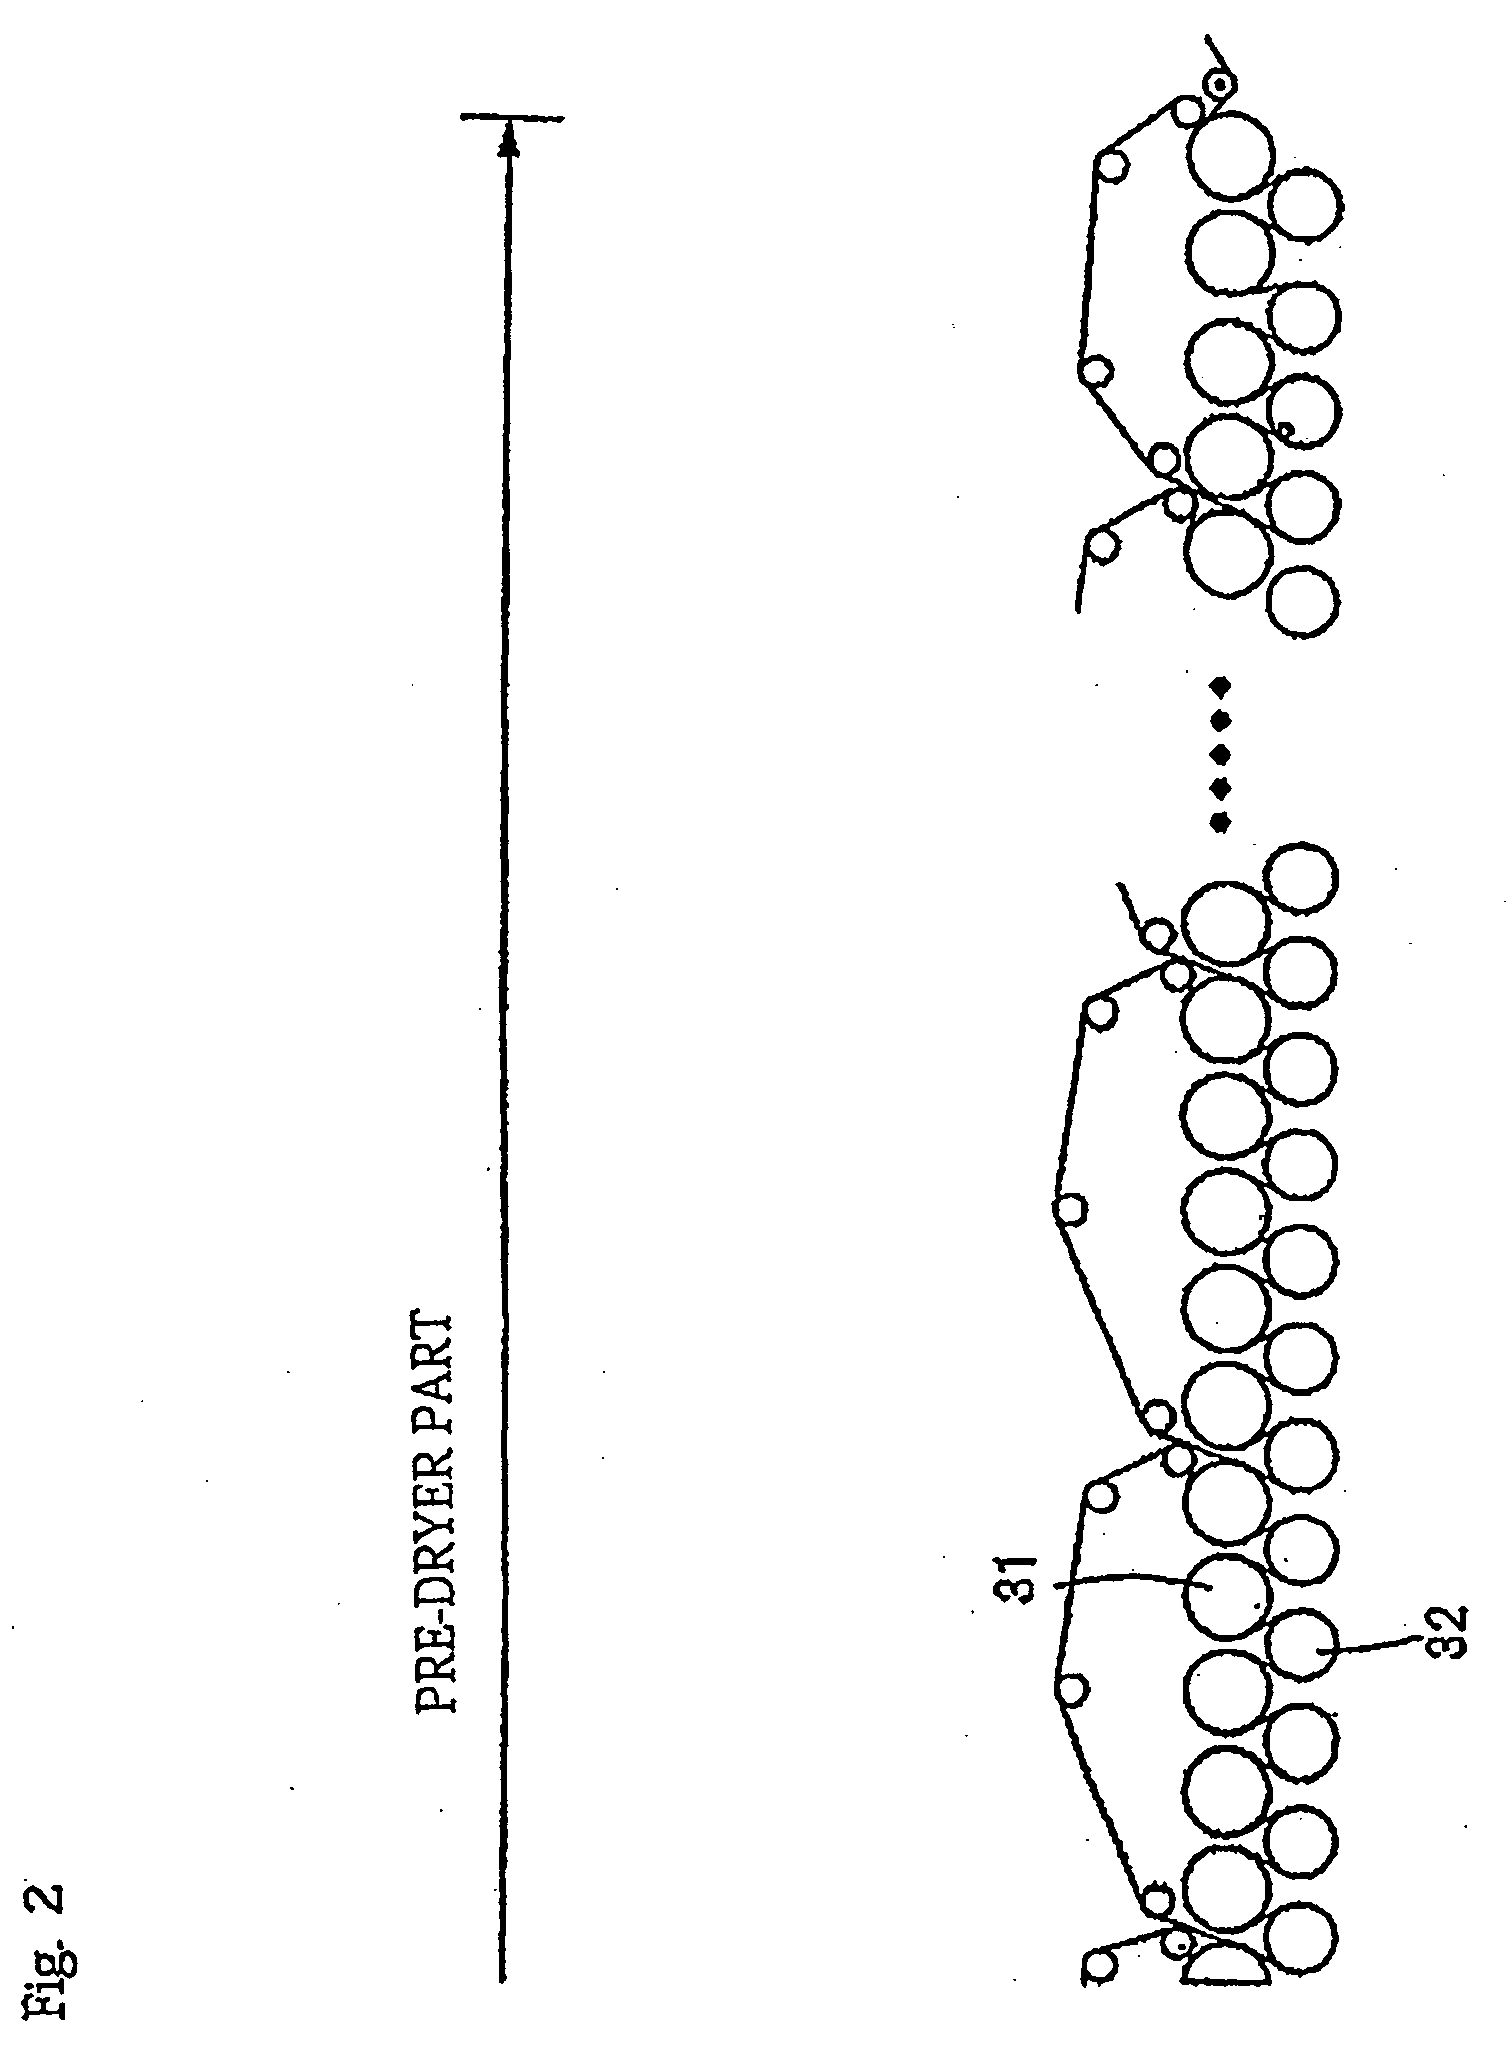 Method of Manufacturing Coated Paper